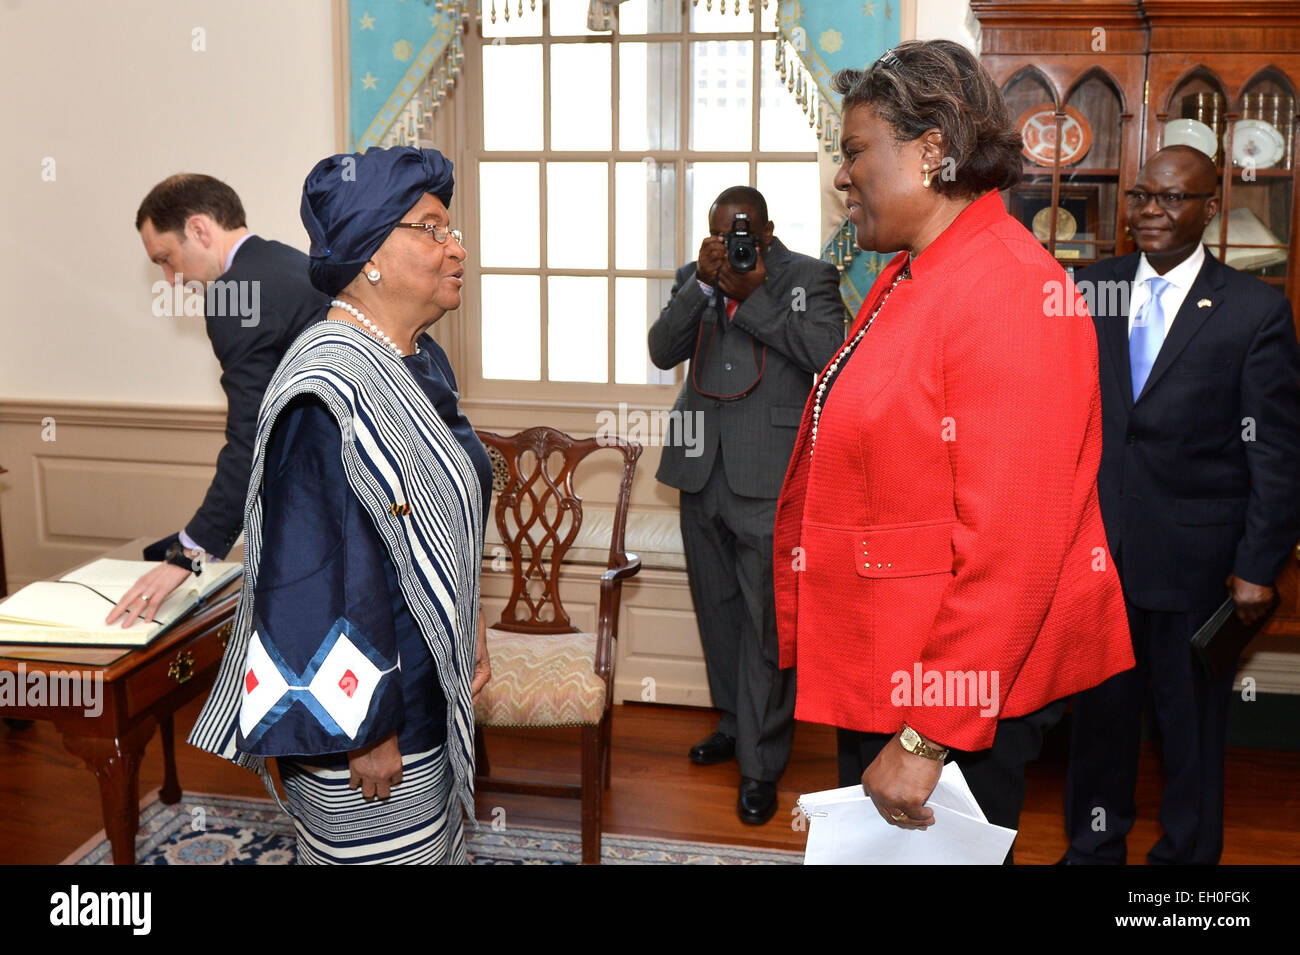 Assistant Secretary of State for African Affairs Linda Thomas-Greenfield greets Liberian President Ellen Johnson Sirleaf before her meeting with U.S. Secretary of State John Kerry at the U.S. Department of State in Washington, D.C., on February 27, 2015. Stock Photo